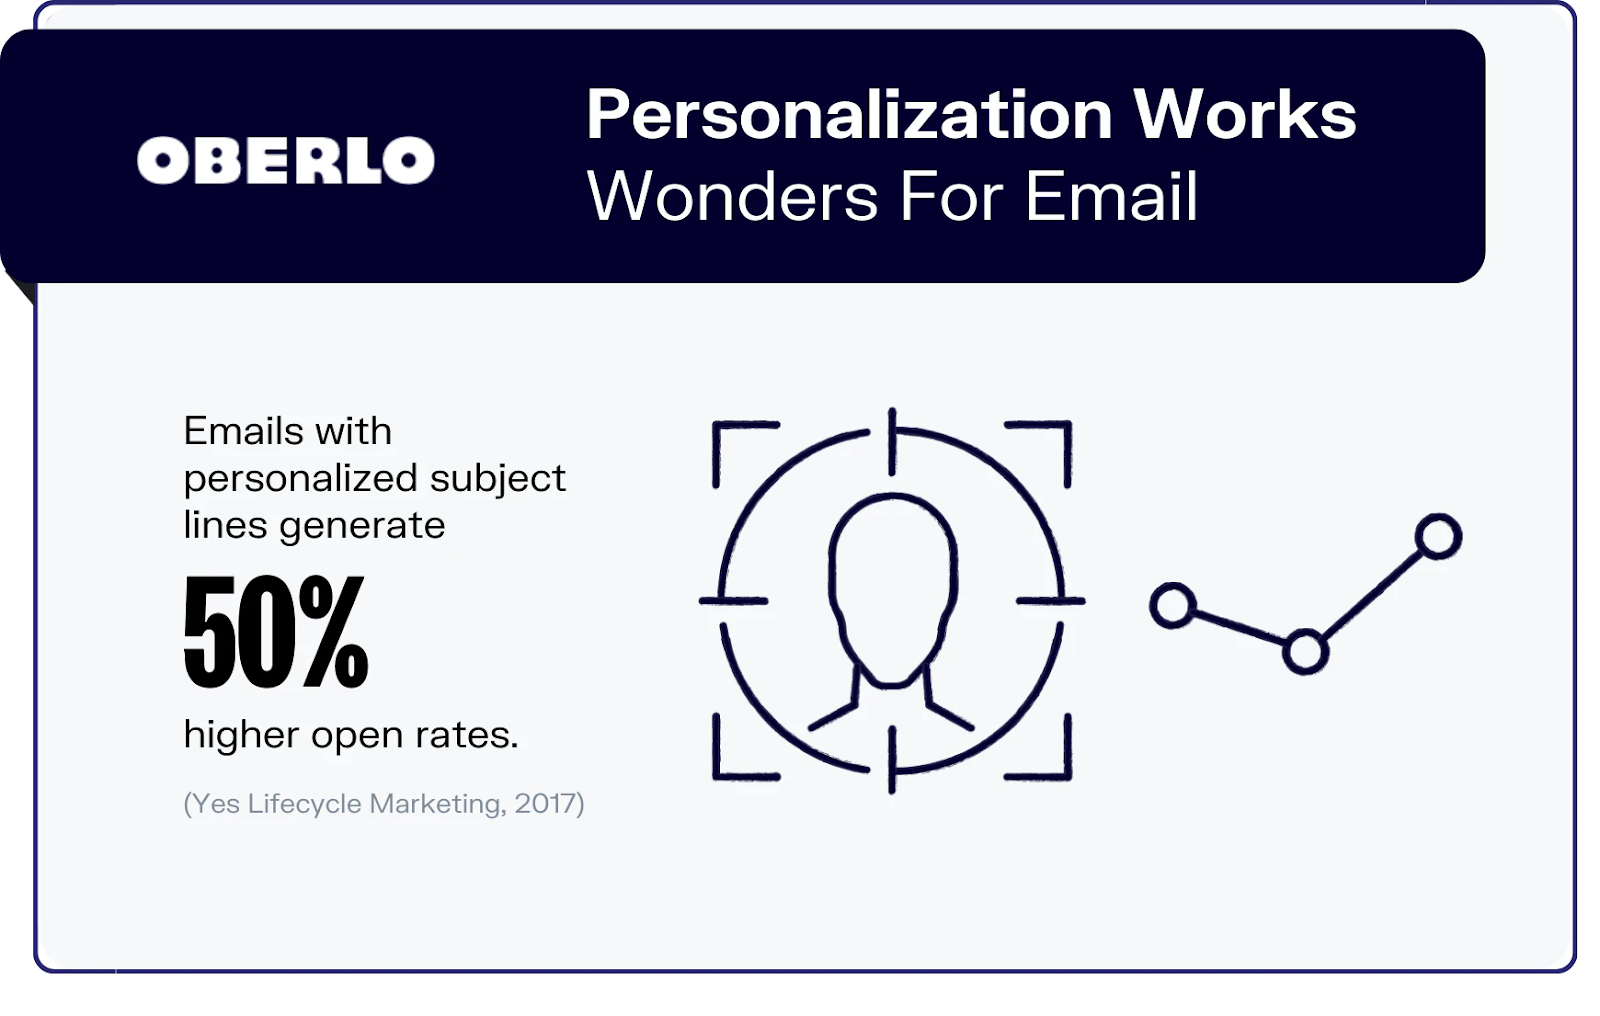 Oberlo personalization works wonders for email